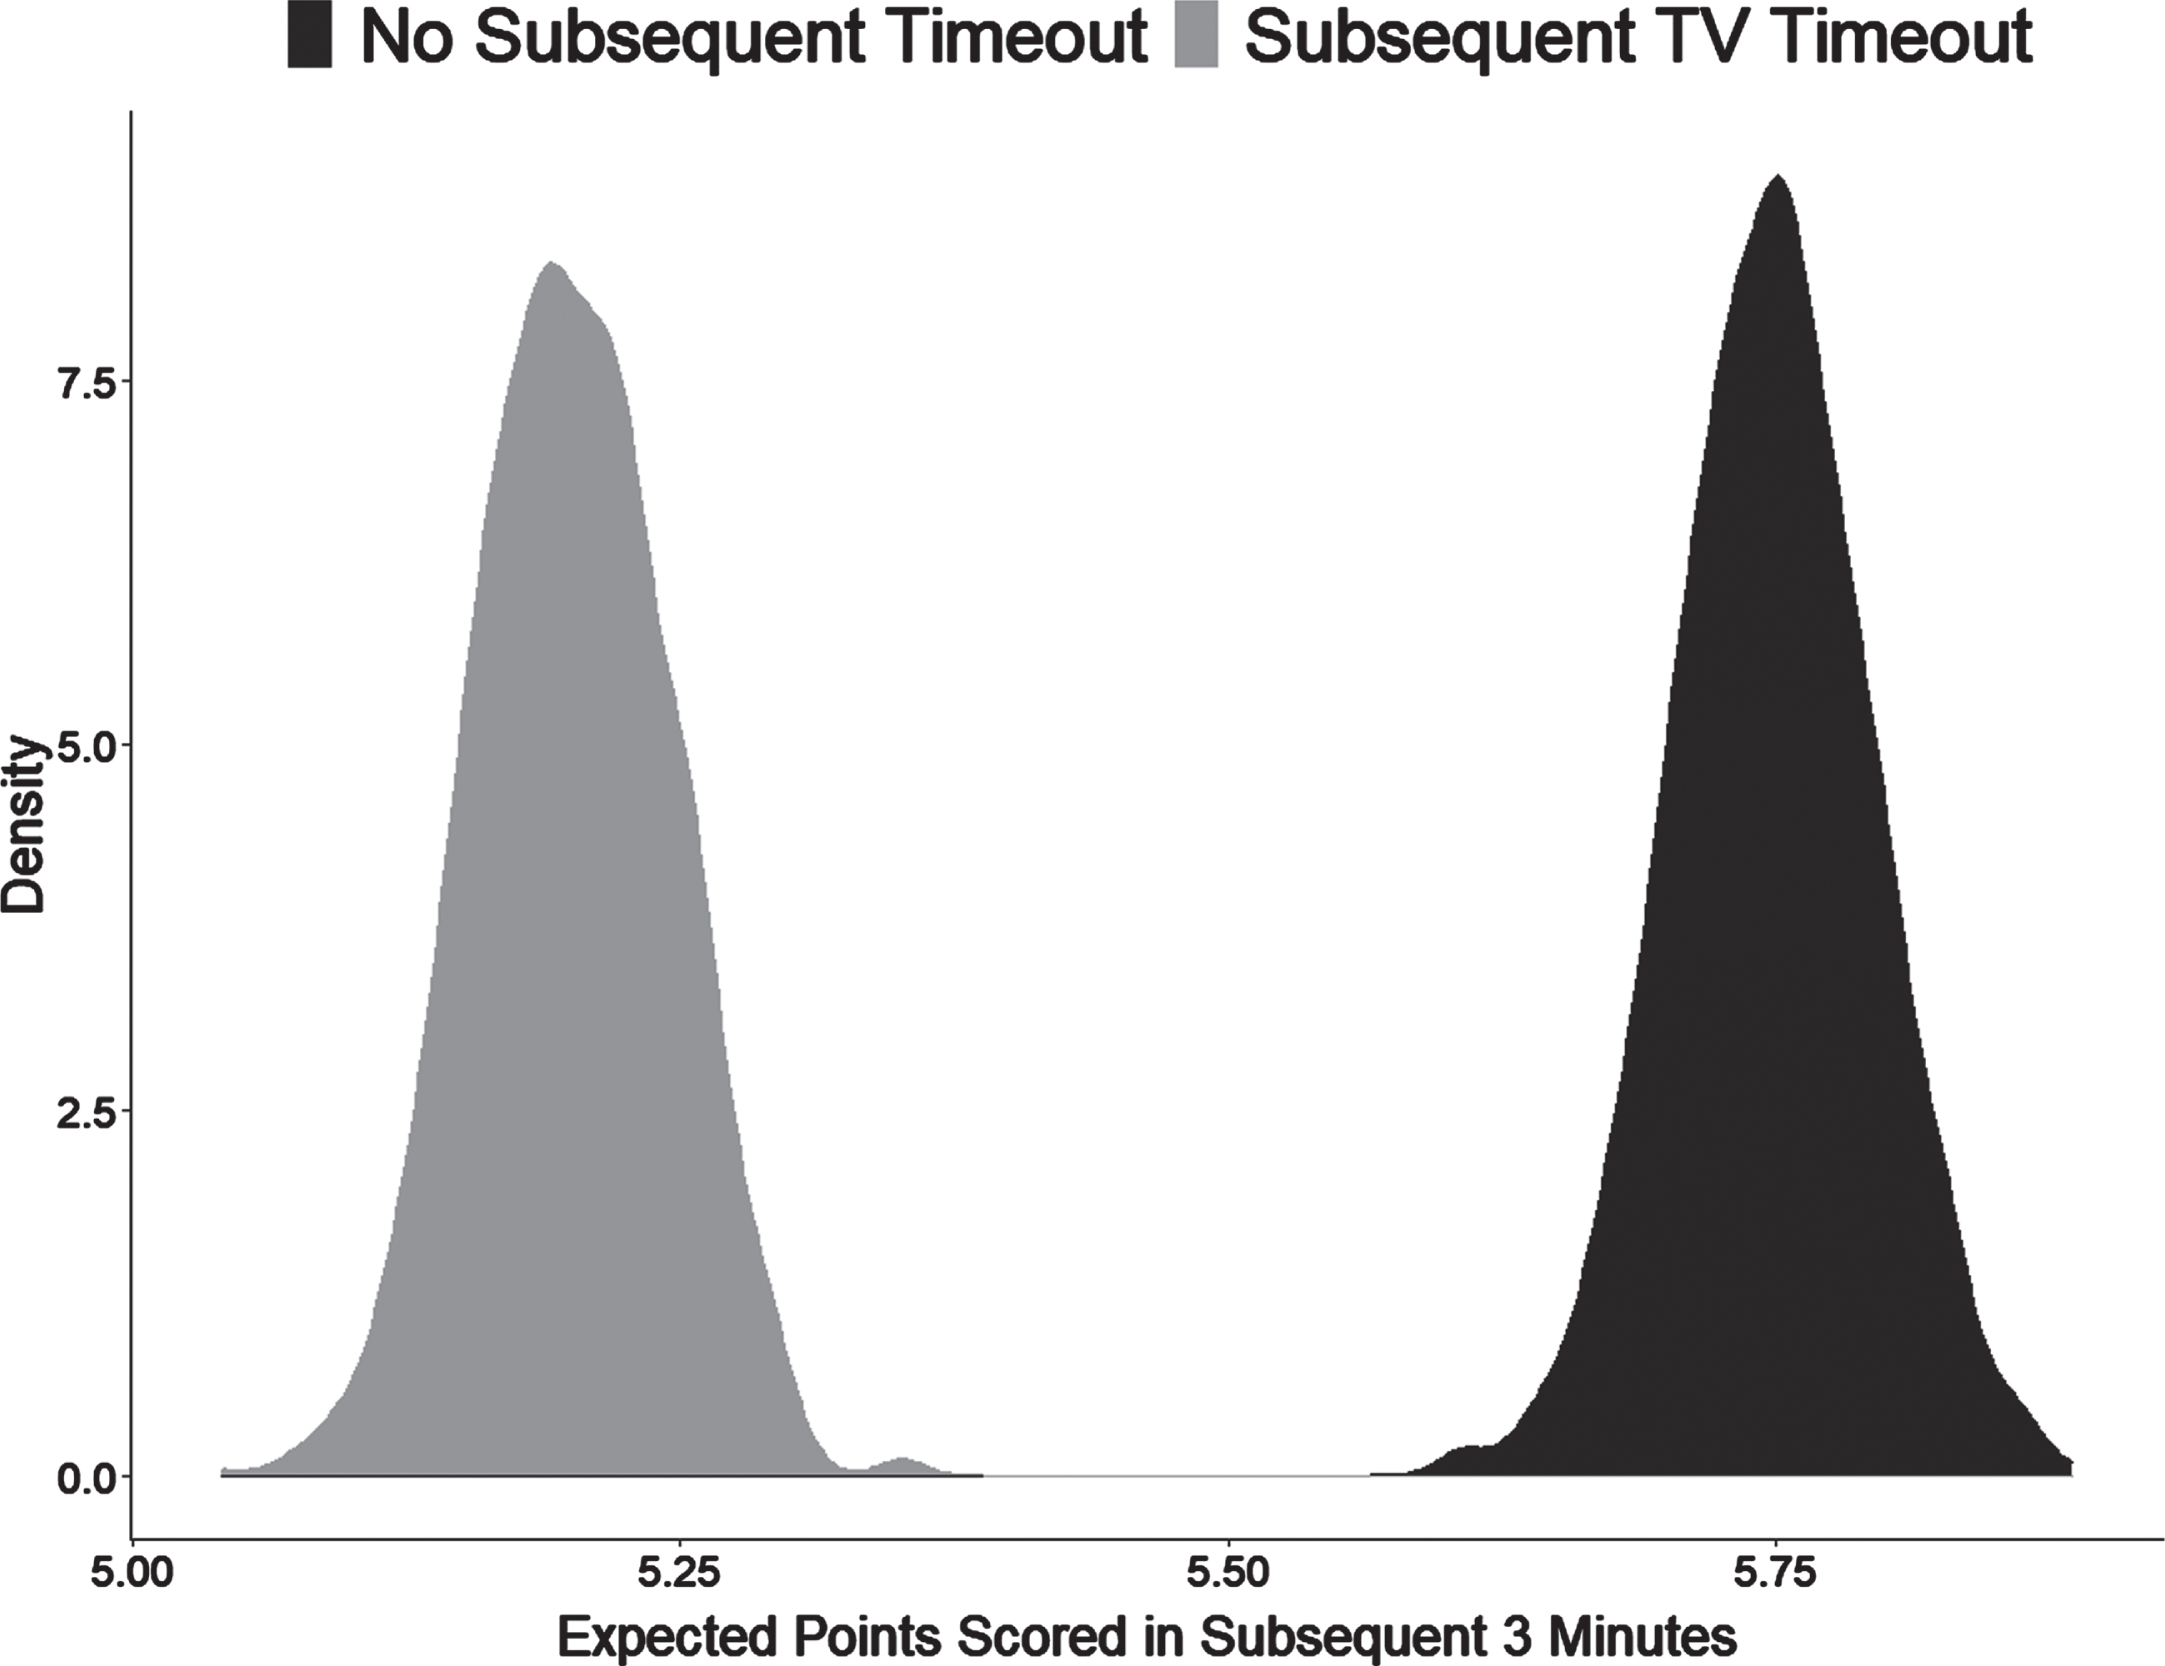 Distribution of Points Scored With and Without TV Timeouts. The two density distributions reveal a clear reduction in points scored after a TV timeout (cyan) versus no TV timeout (red).